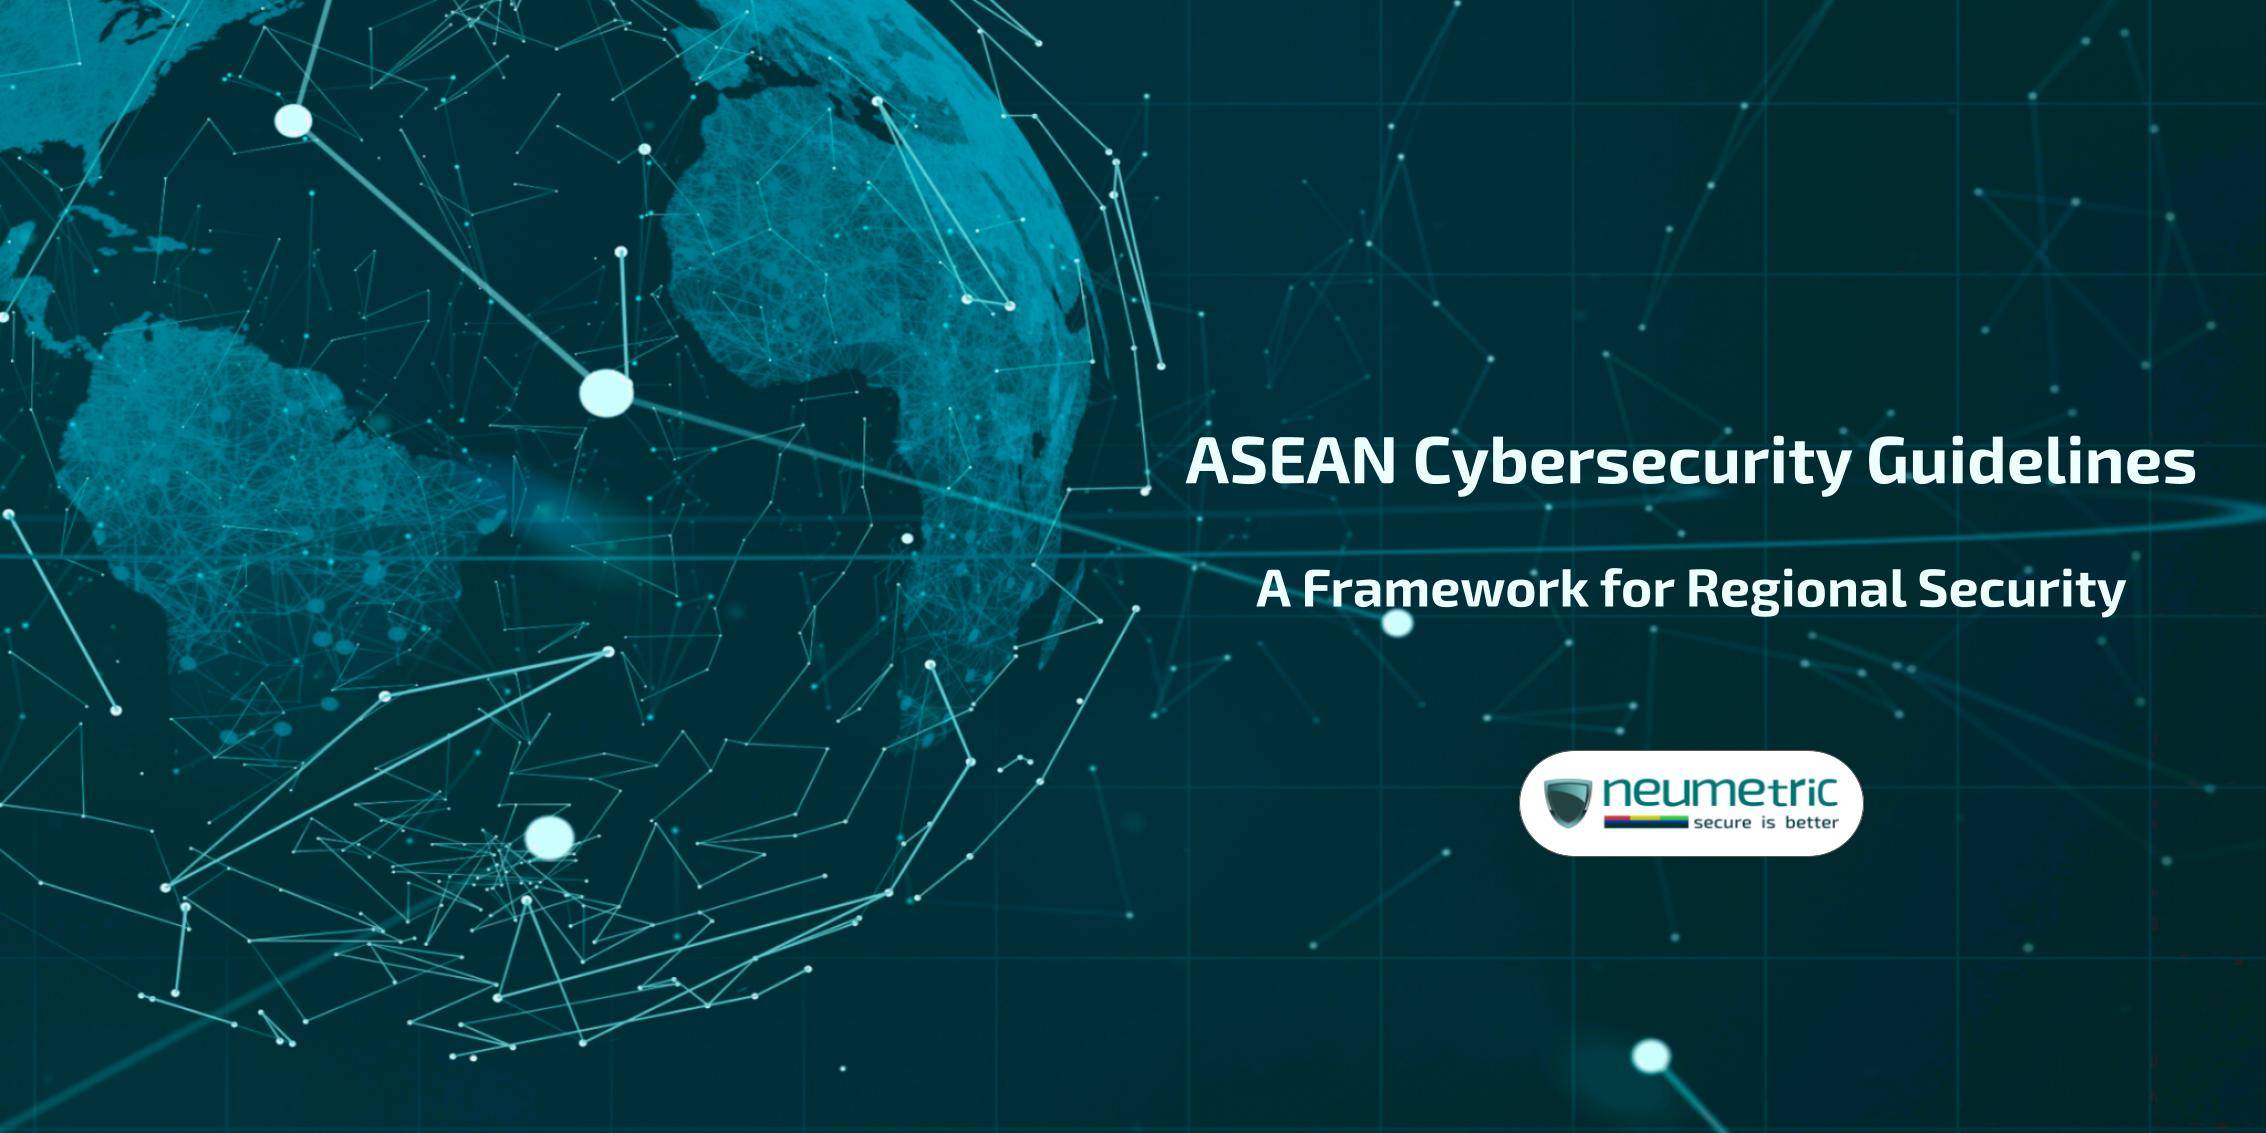 ASEAN Cybersecurity Guidelines: A Framework for Regional Security